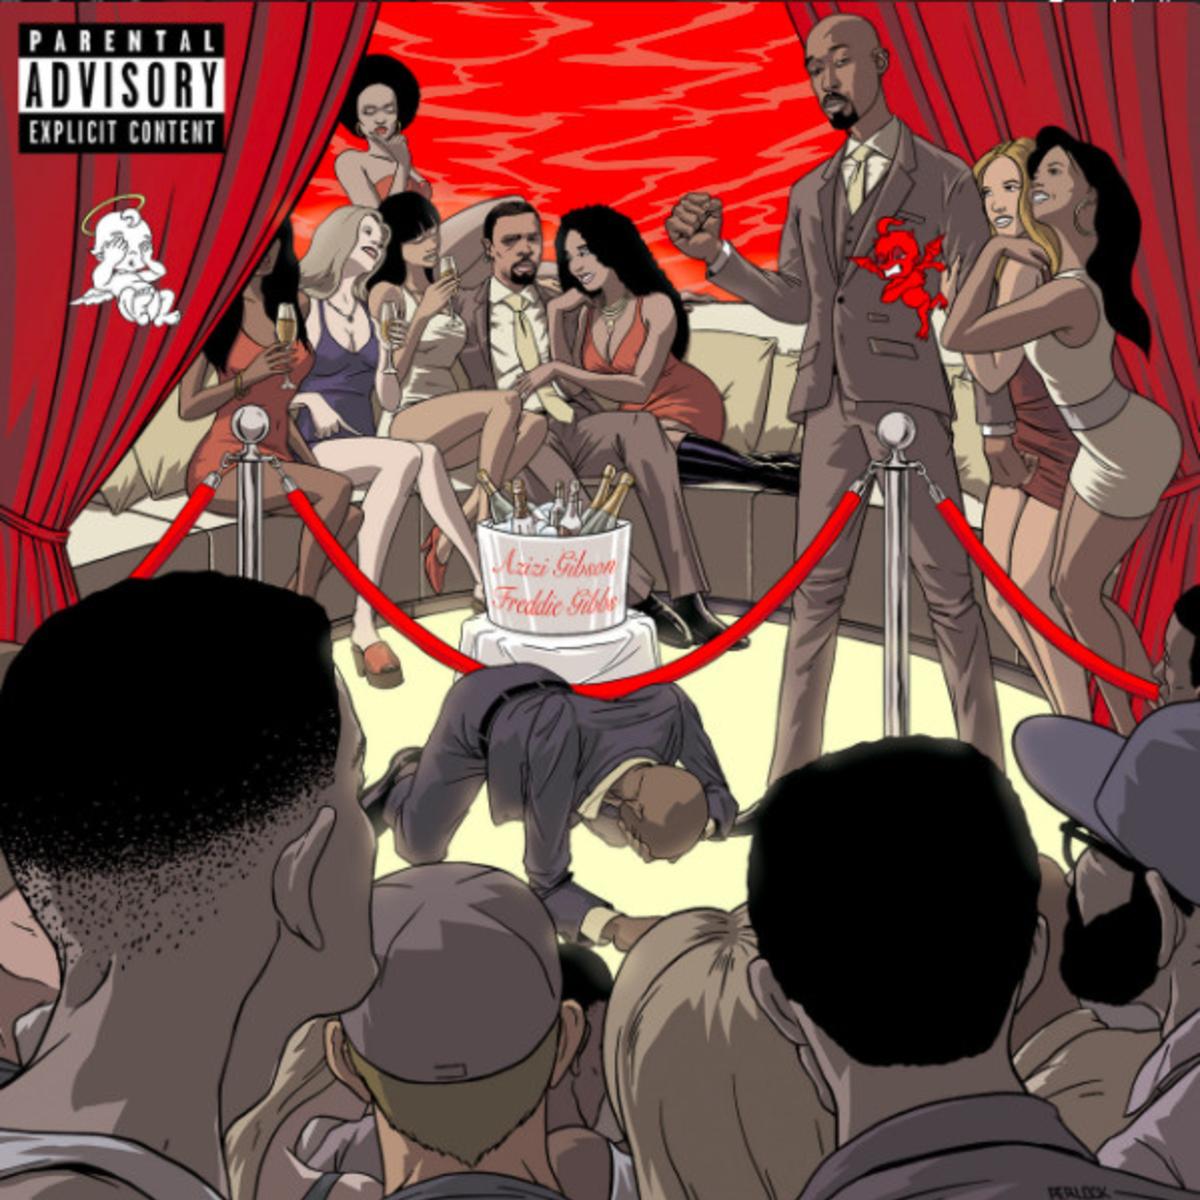 Azizi Gibson & Freddie Gibbs Get Disrespectful In “Hate To Say It”